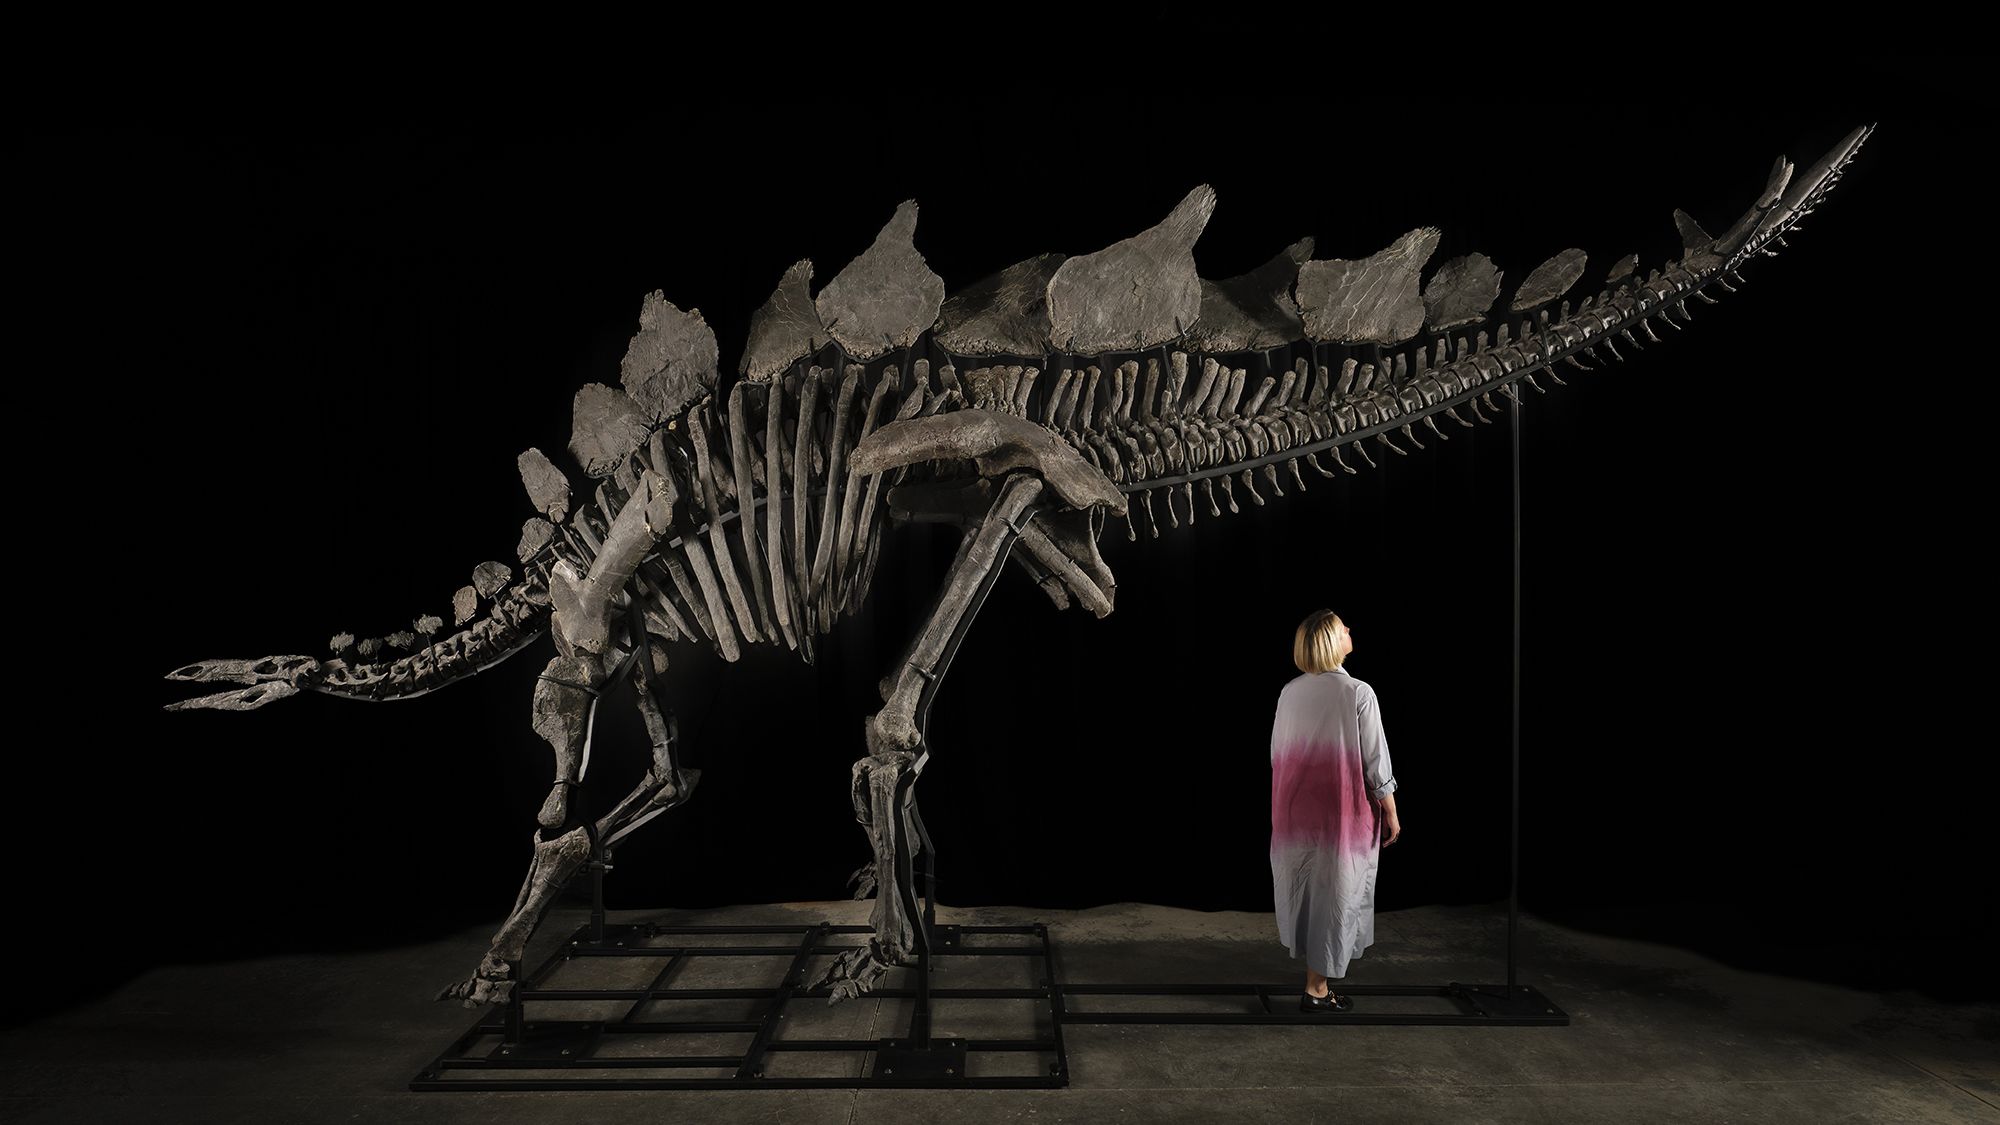 The most complete and best preserved Stegosaurus skeleton is set to go up for auction at Sotheby's next month